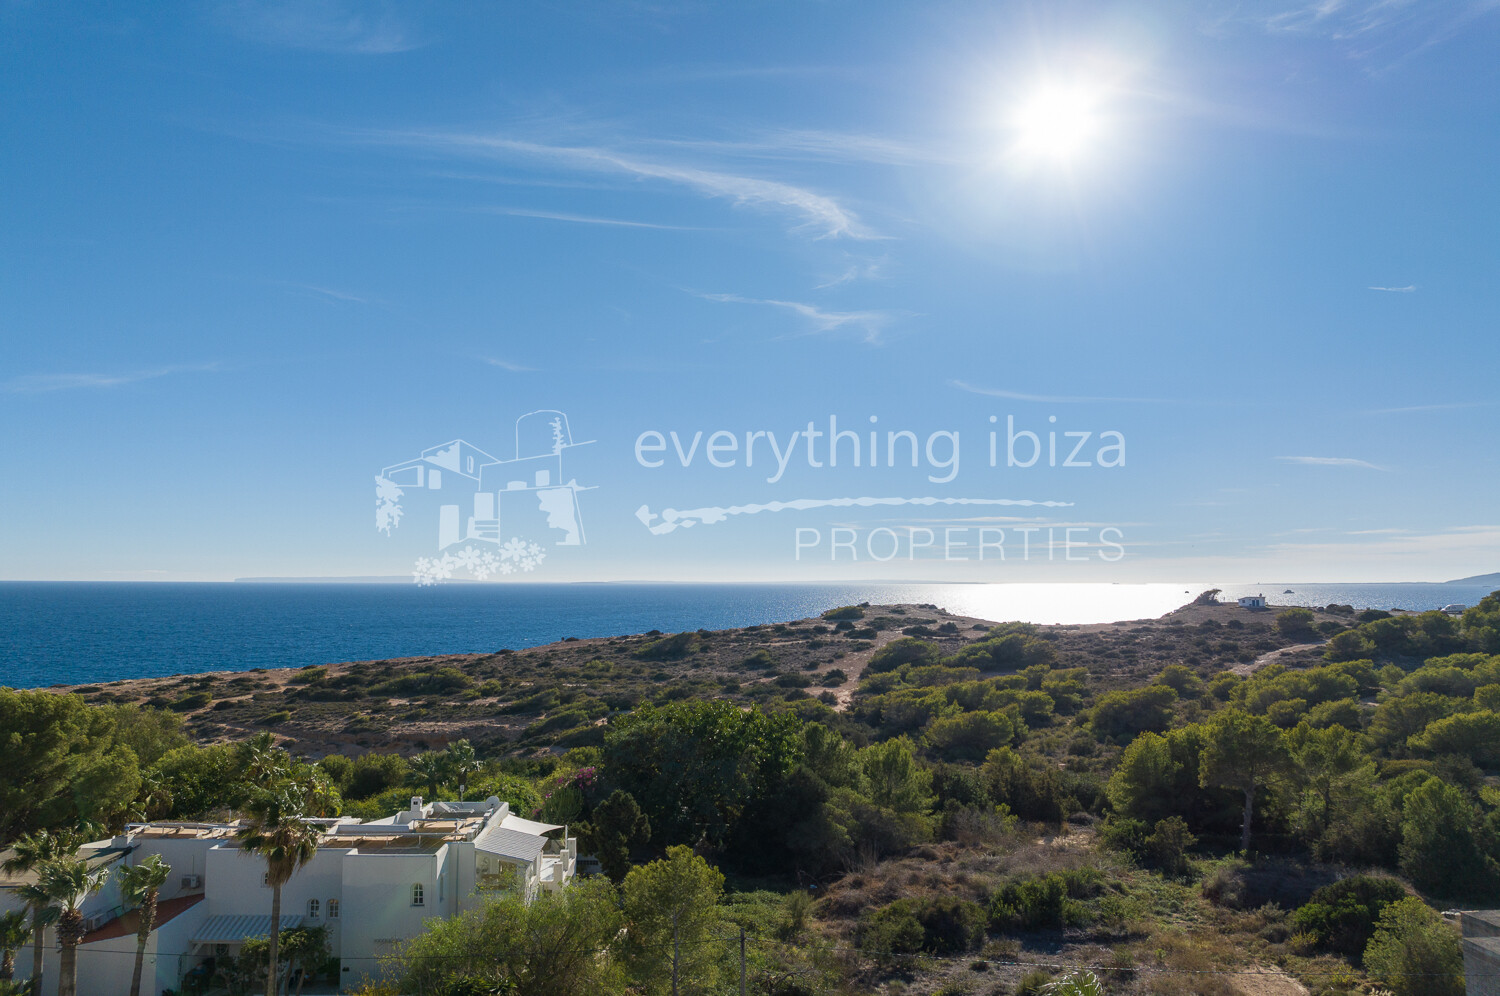 Two Luxury New Villas in Cap Martinet with Views of the Sea and Formentera, ref. 1663, for sale in Ibiza by everything ibiza Properties